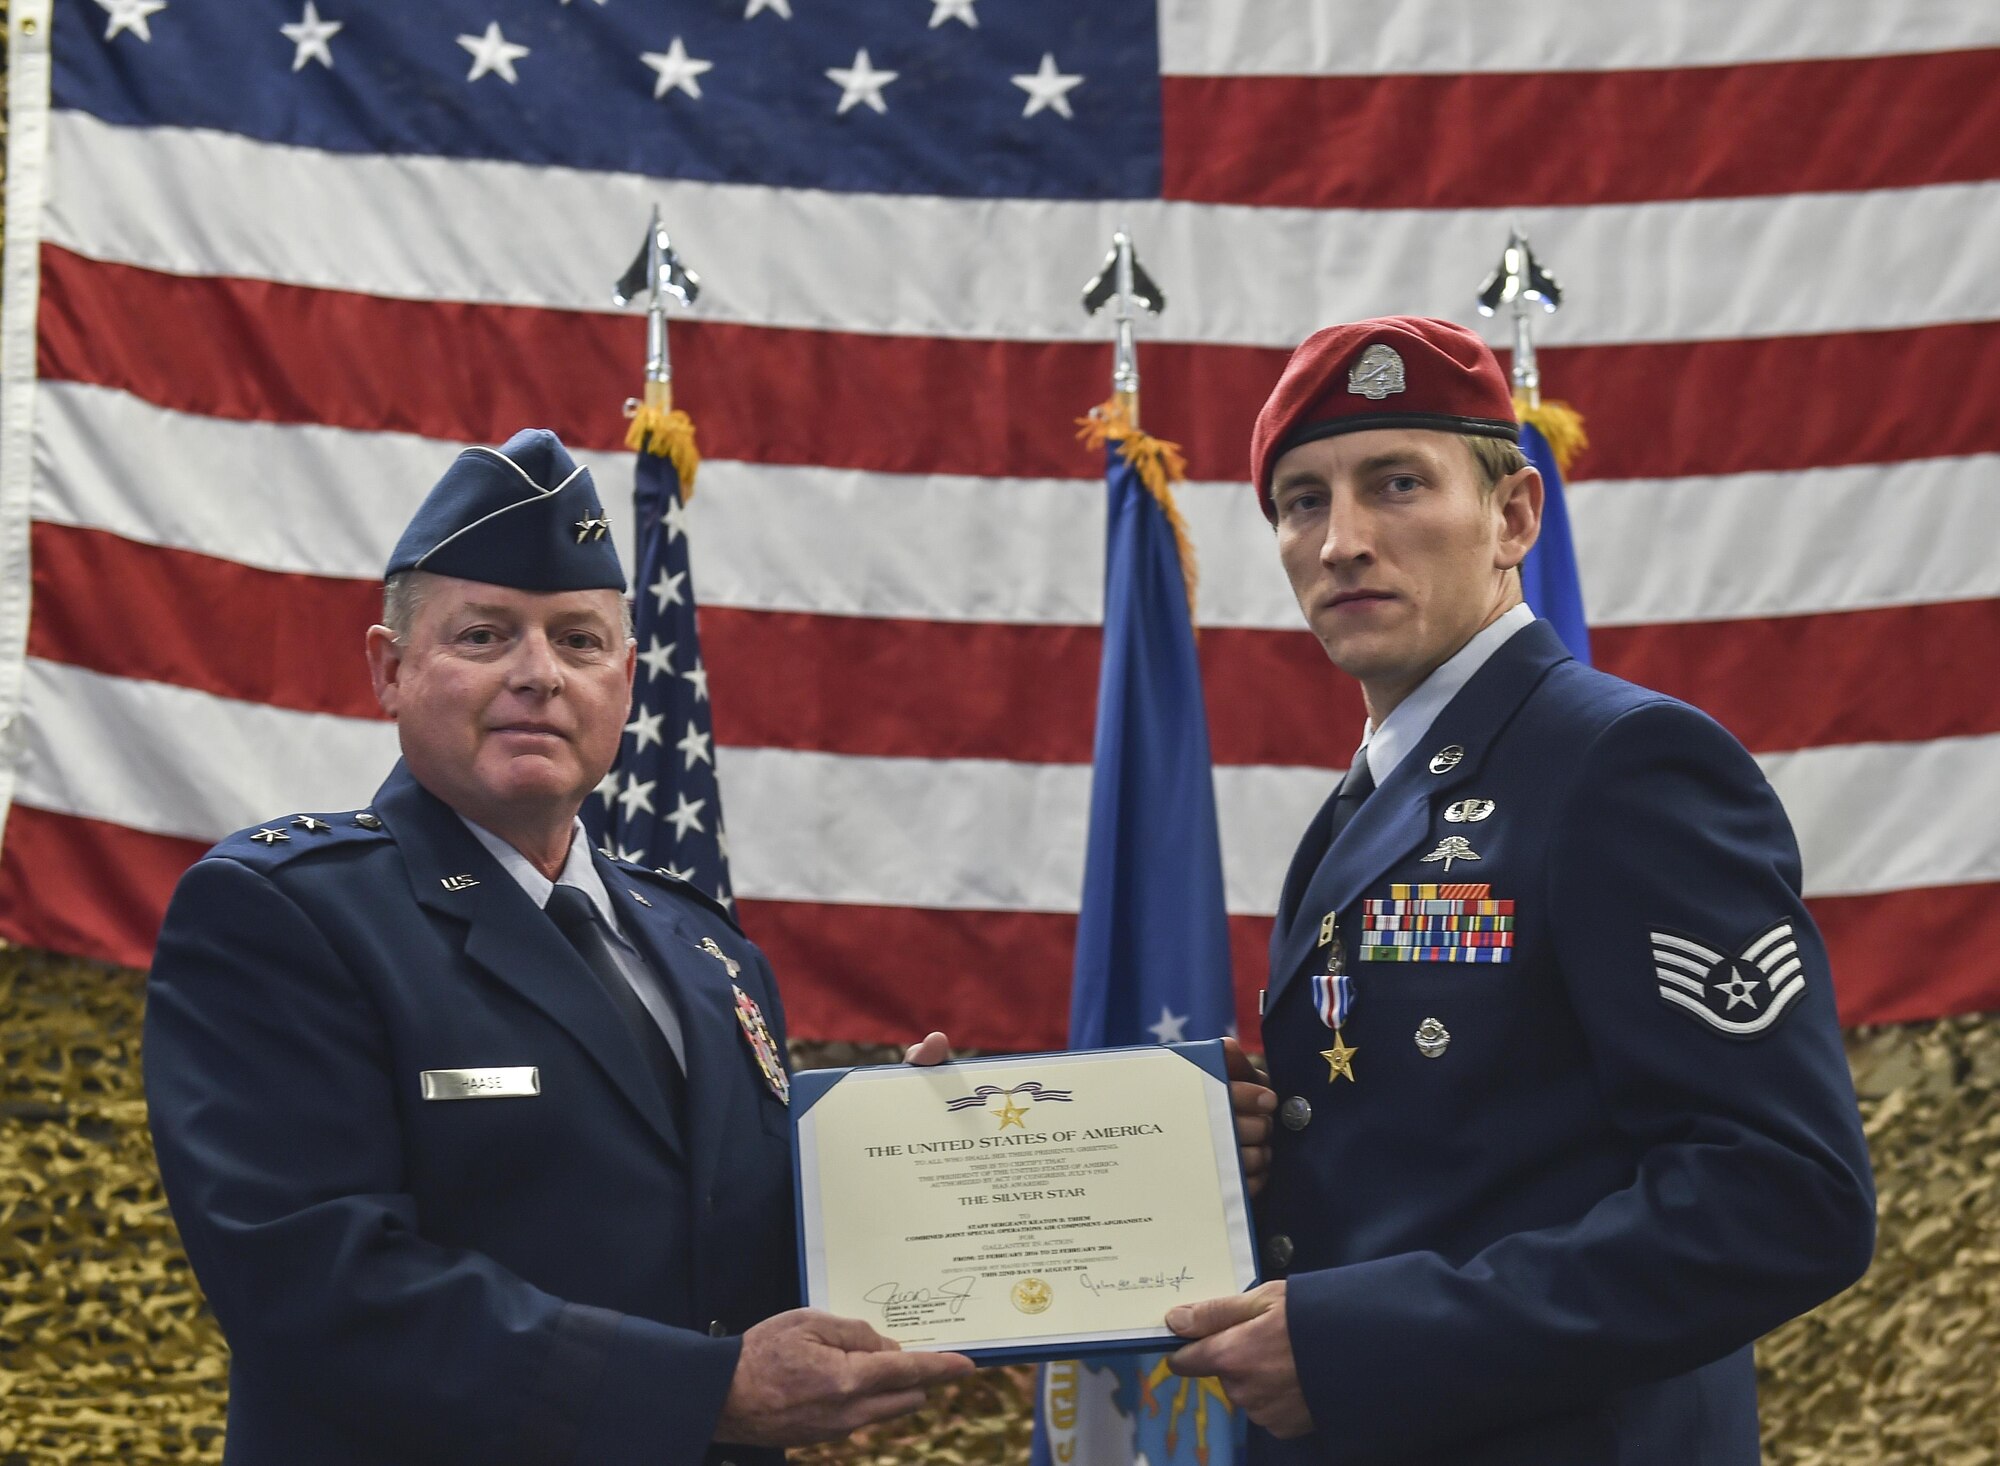 Maj. Gen. Eugene Haase, vice commander of Air Force Special Operations Command, presents Staff Sgt. Keaton Thiem, a combat controller with the 22nd Special Tactics Squadron, the Silver Star Medal at Joint Base Lewis-McChord, Wash., Nov. 16, 2016. Thiem used air power to ensure the safety of his 100-plus man SOF element during a 14-hour firefight with no regard for his own personal safety, while deployed with U.S. Army Special Operations Forces in Afghanistan.(U.S. Air Force photo by Senior Airman Ryan Conroy) 